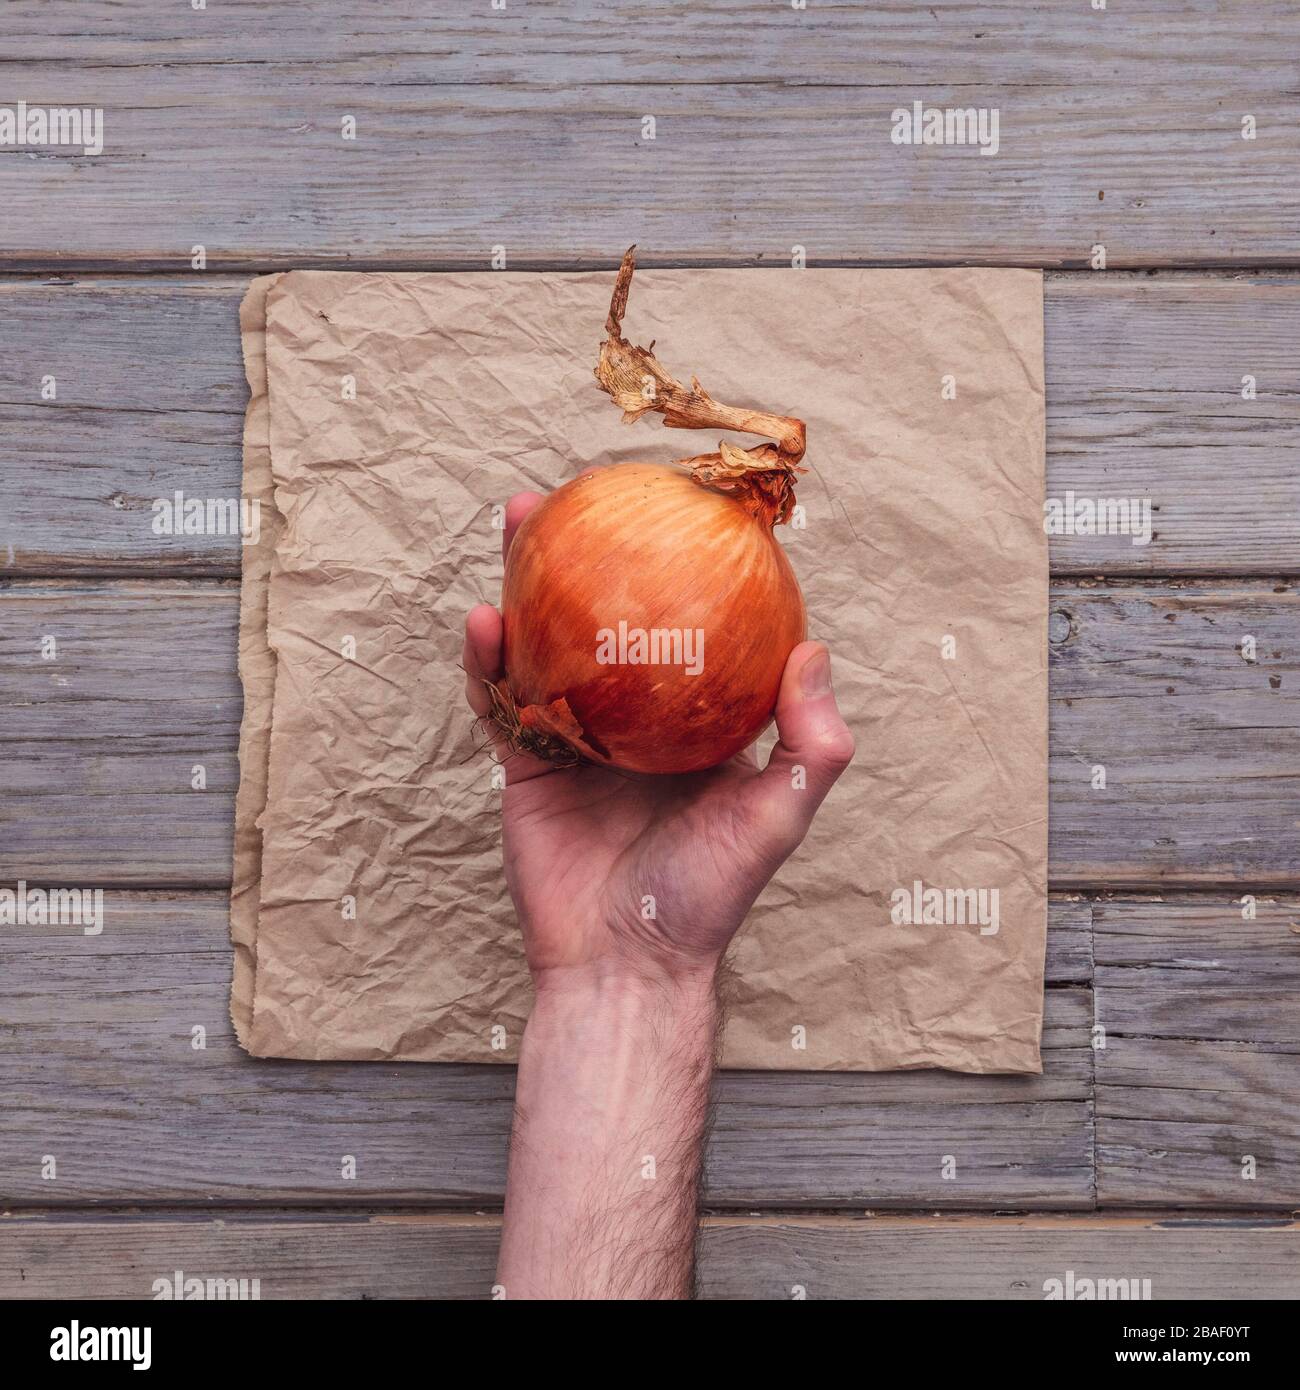 A male hand holding a fresh onion against a rustic background Stock Photo